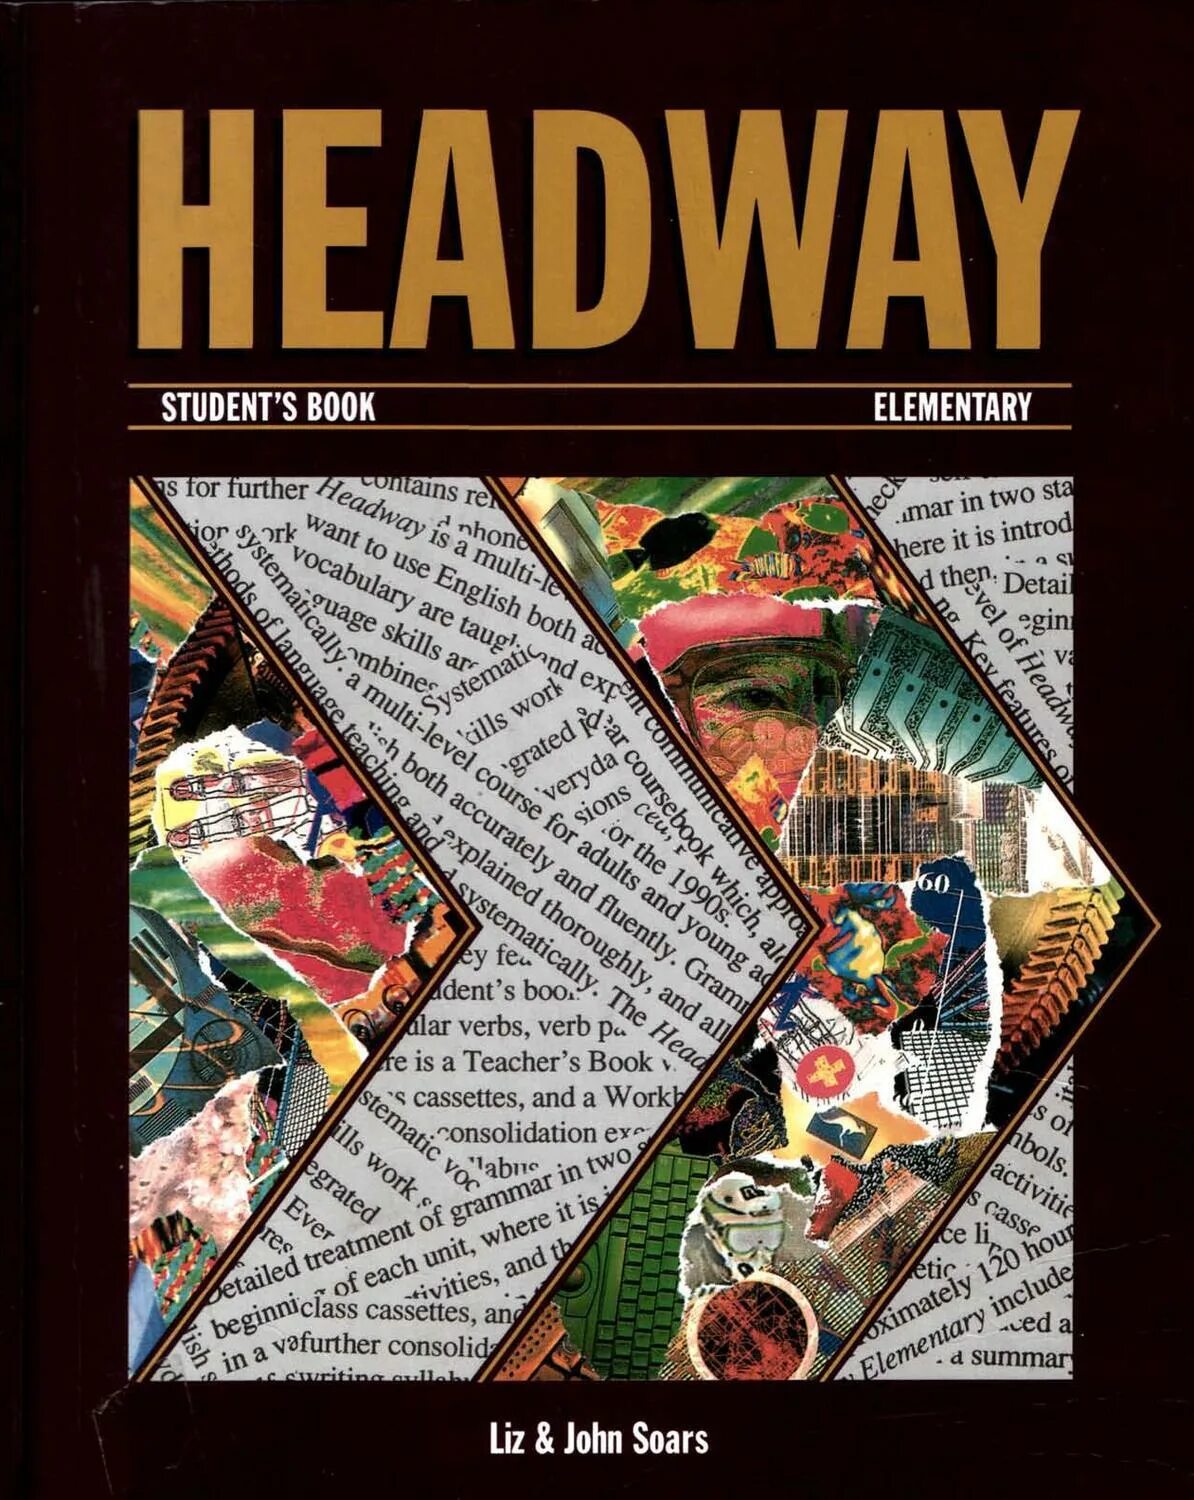 Headway Elementary Edition students book. Headway Elementary student book Oxford. Headway Elementary 1st Edition. Headway Elementary книга. Pdf student books elementary